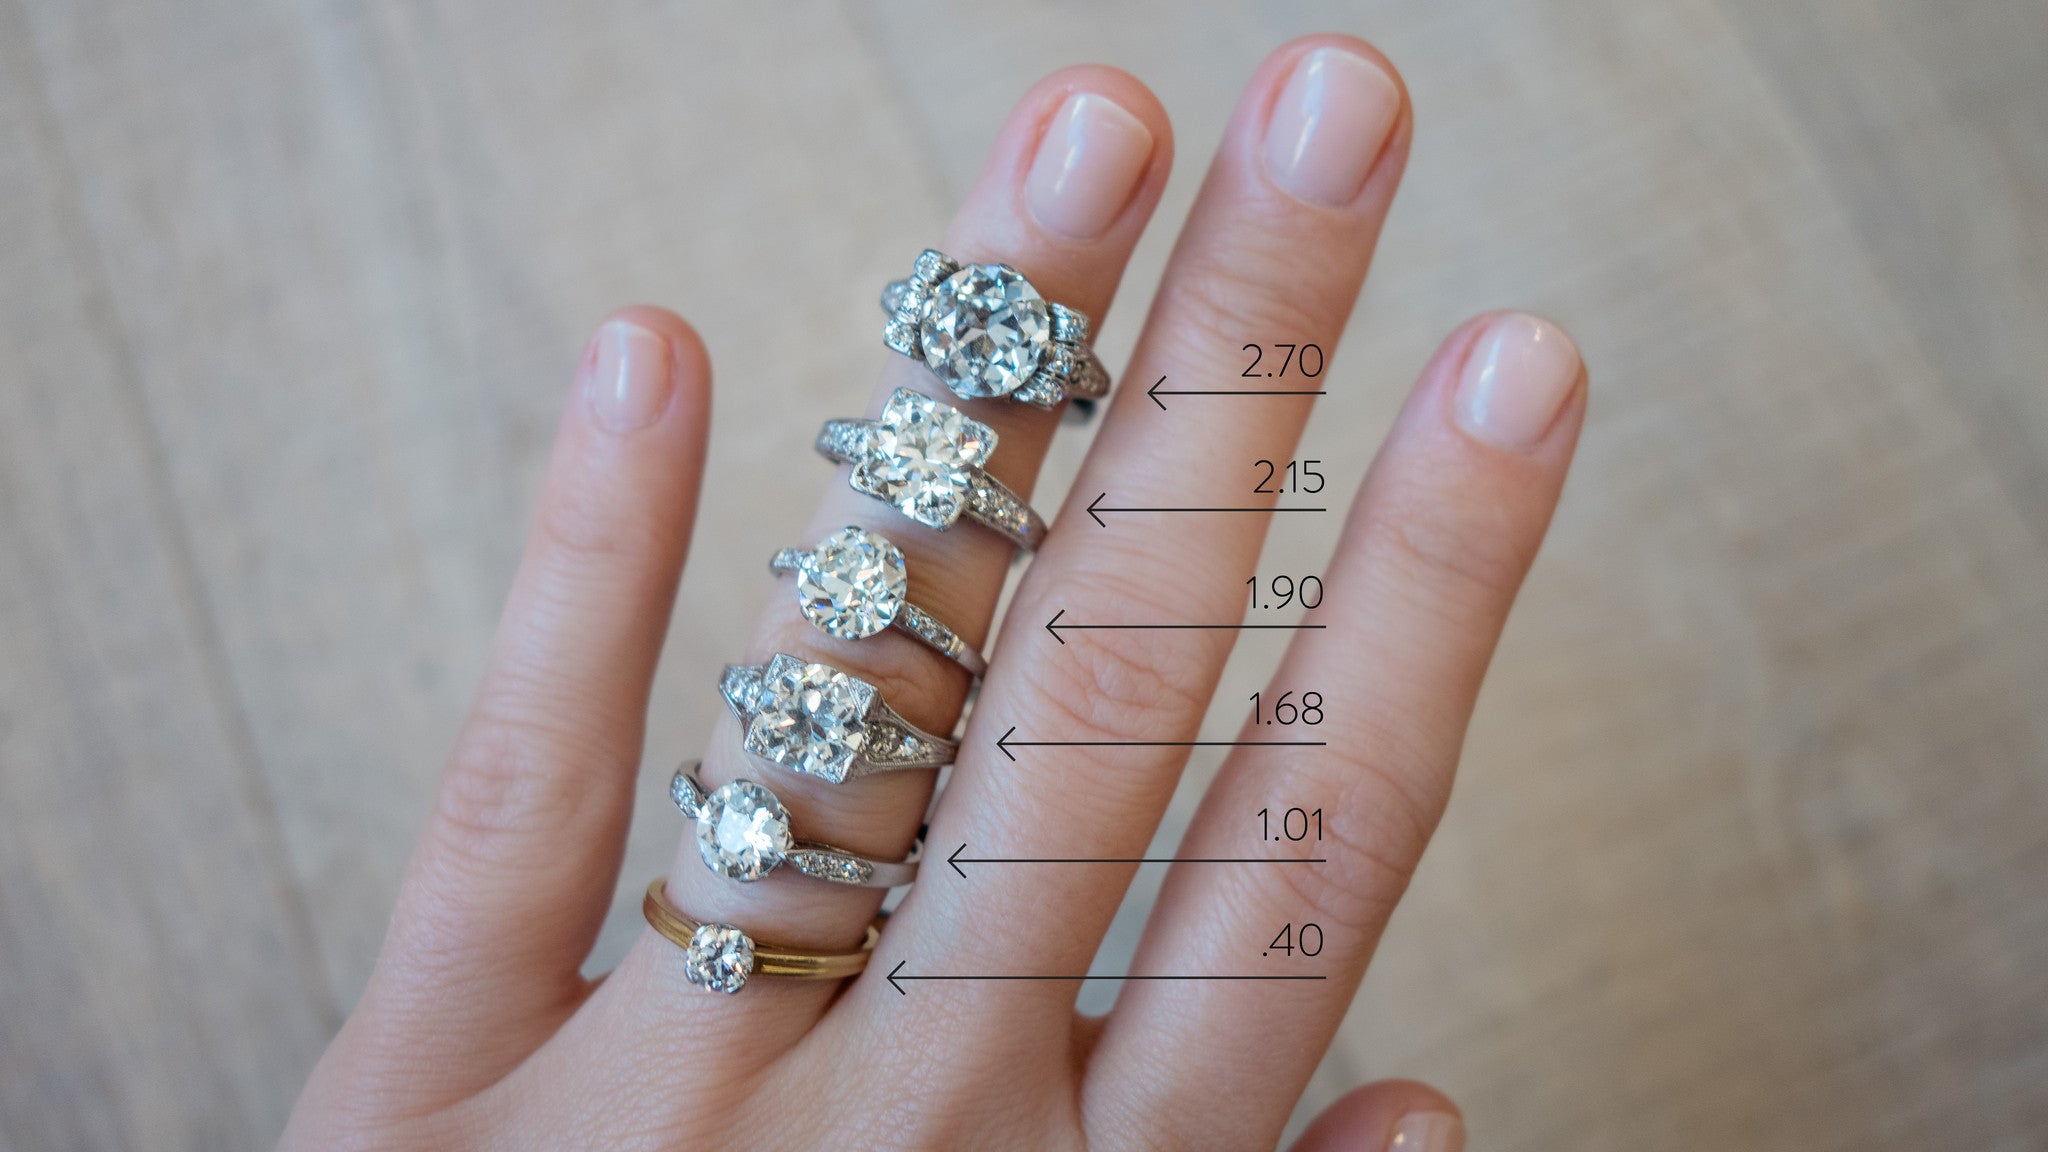 Diamond Carat Weight Size Chart Comprehensive Guide 2022 | vlr.eng.br